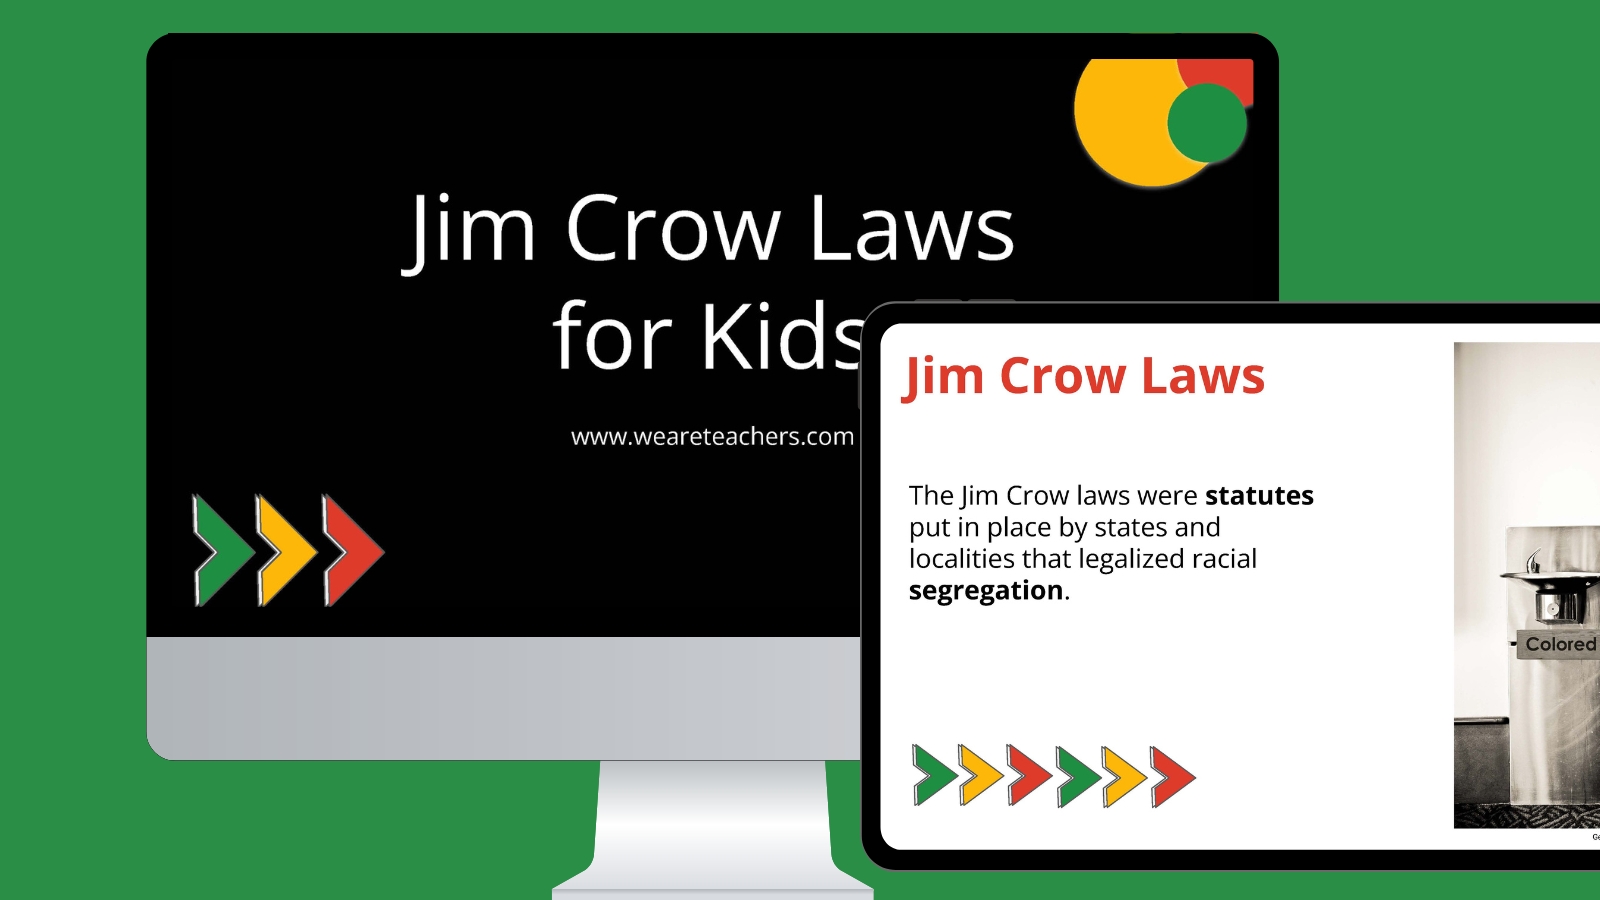 Jim Crow Laws for Kids Google slides on a computer and a tablet screen.